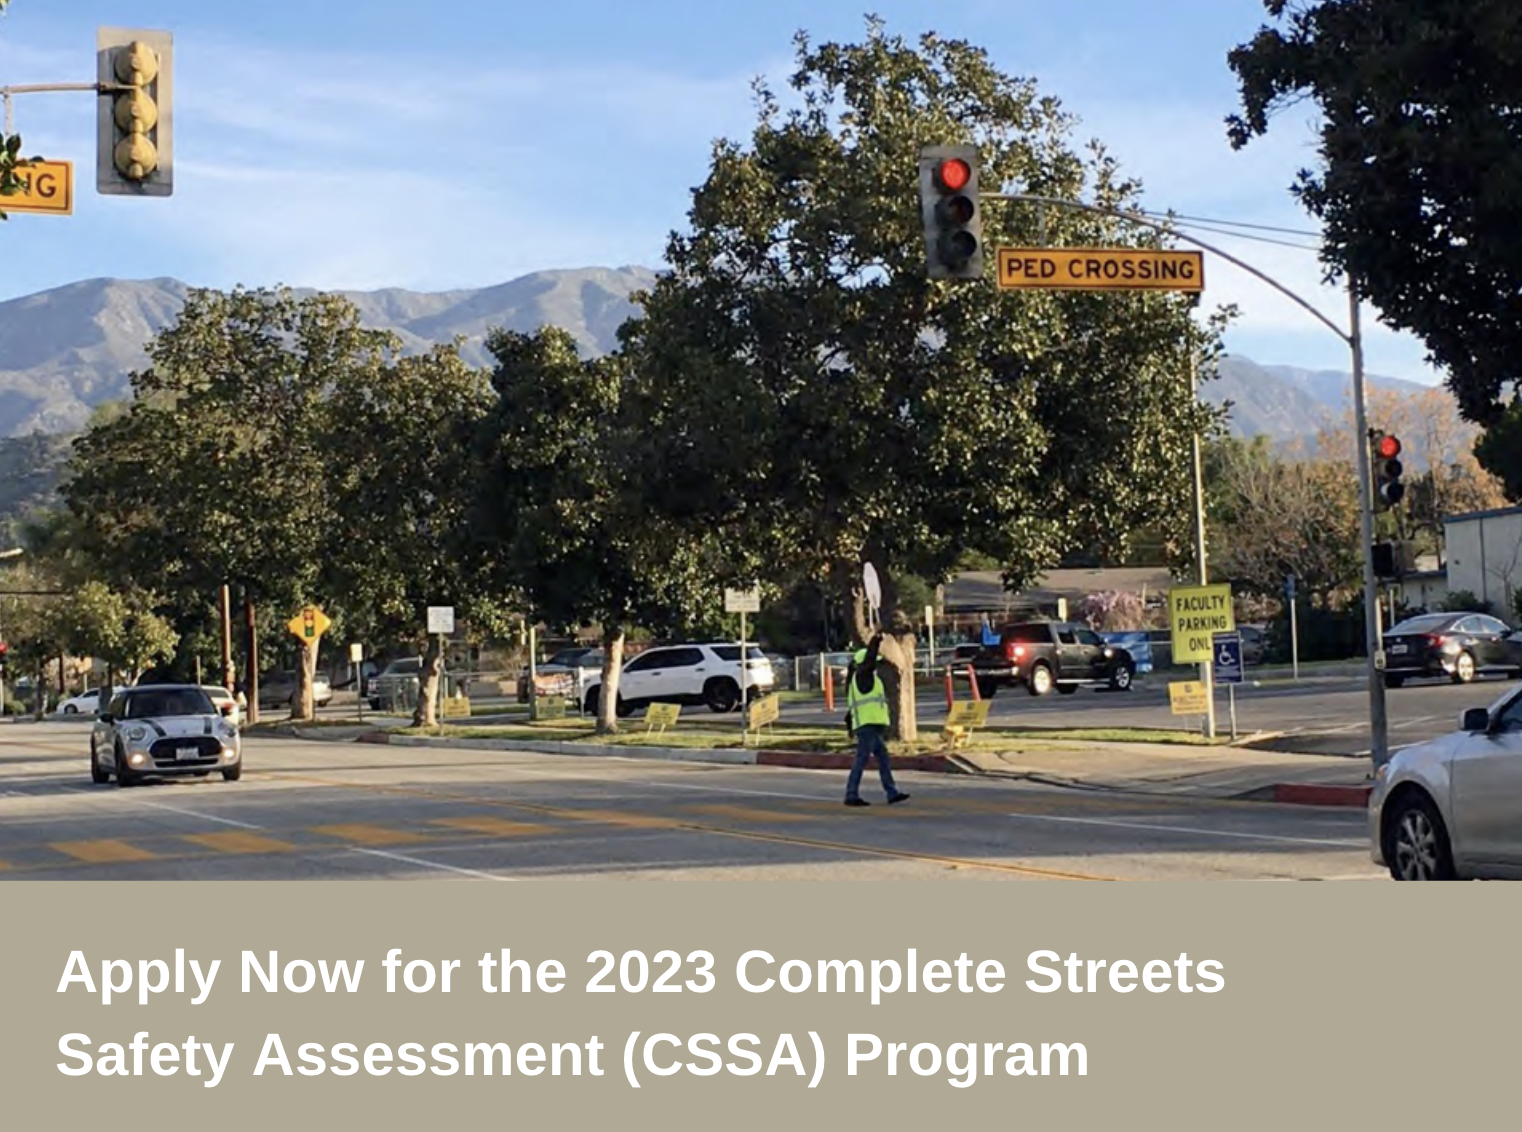 Crossing guard at a pedestrian crossing in Claremont, CA with white text on a beige box at the bottom "Apply Now for the 2023 Complete Streets Safety Assessment (CSSA) Program"